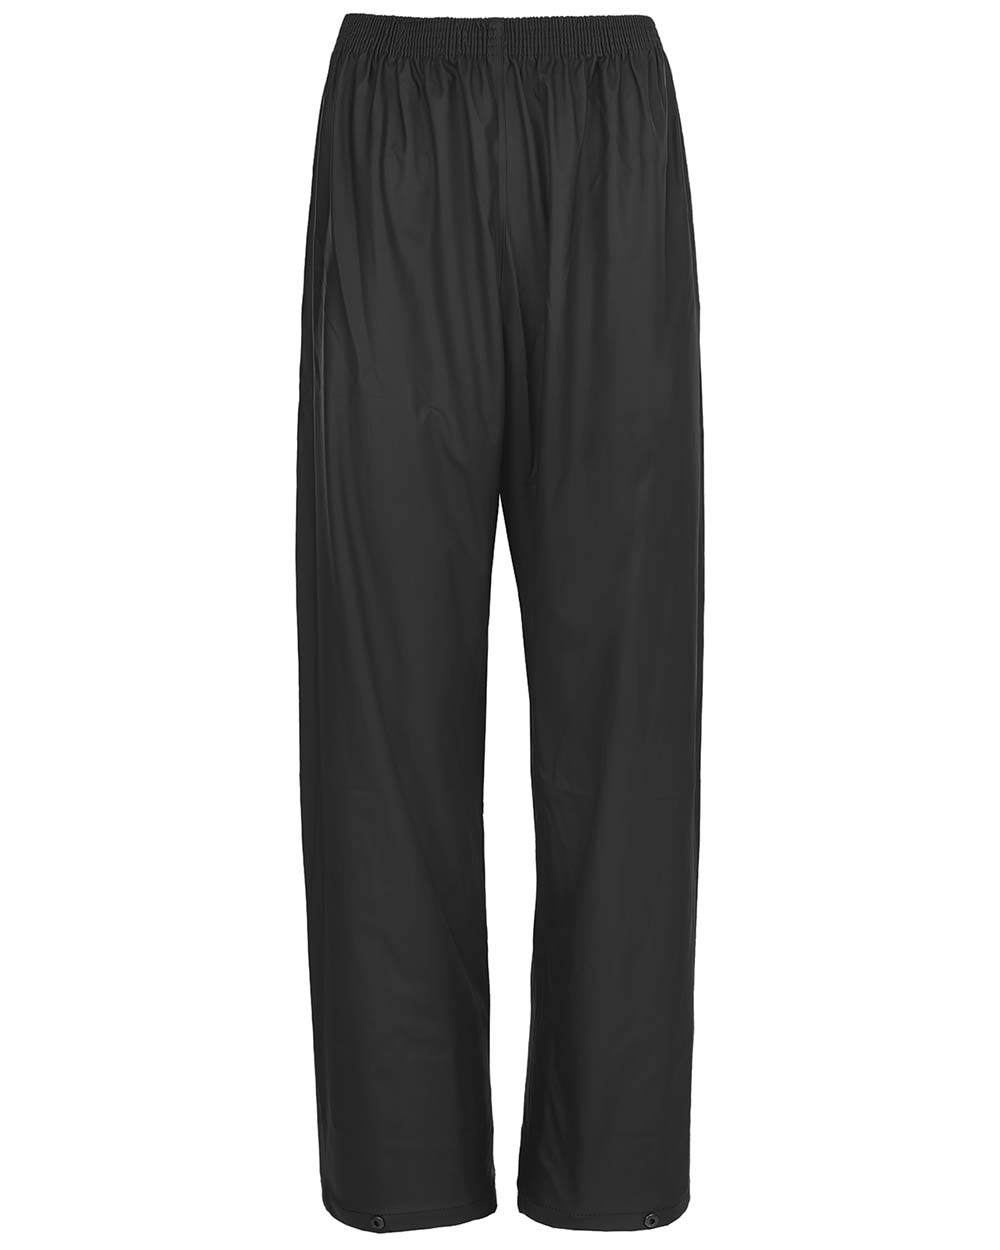 Front view Fort Airflex Waterproof Breathable Trousers in Black 